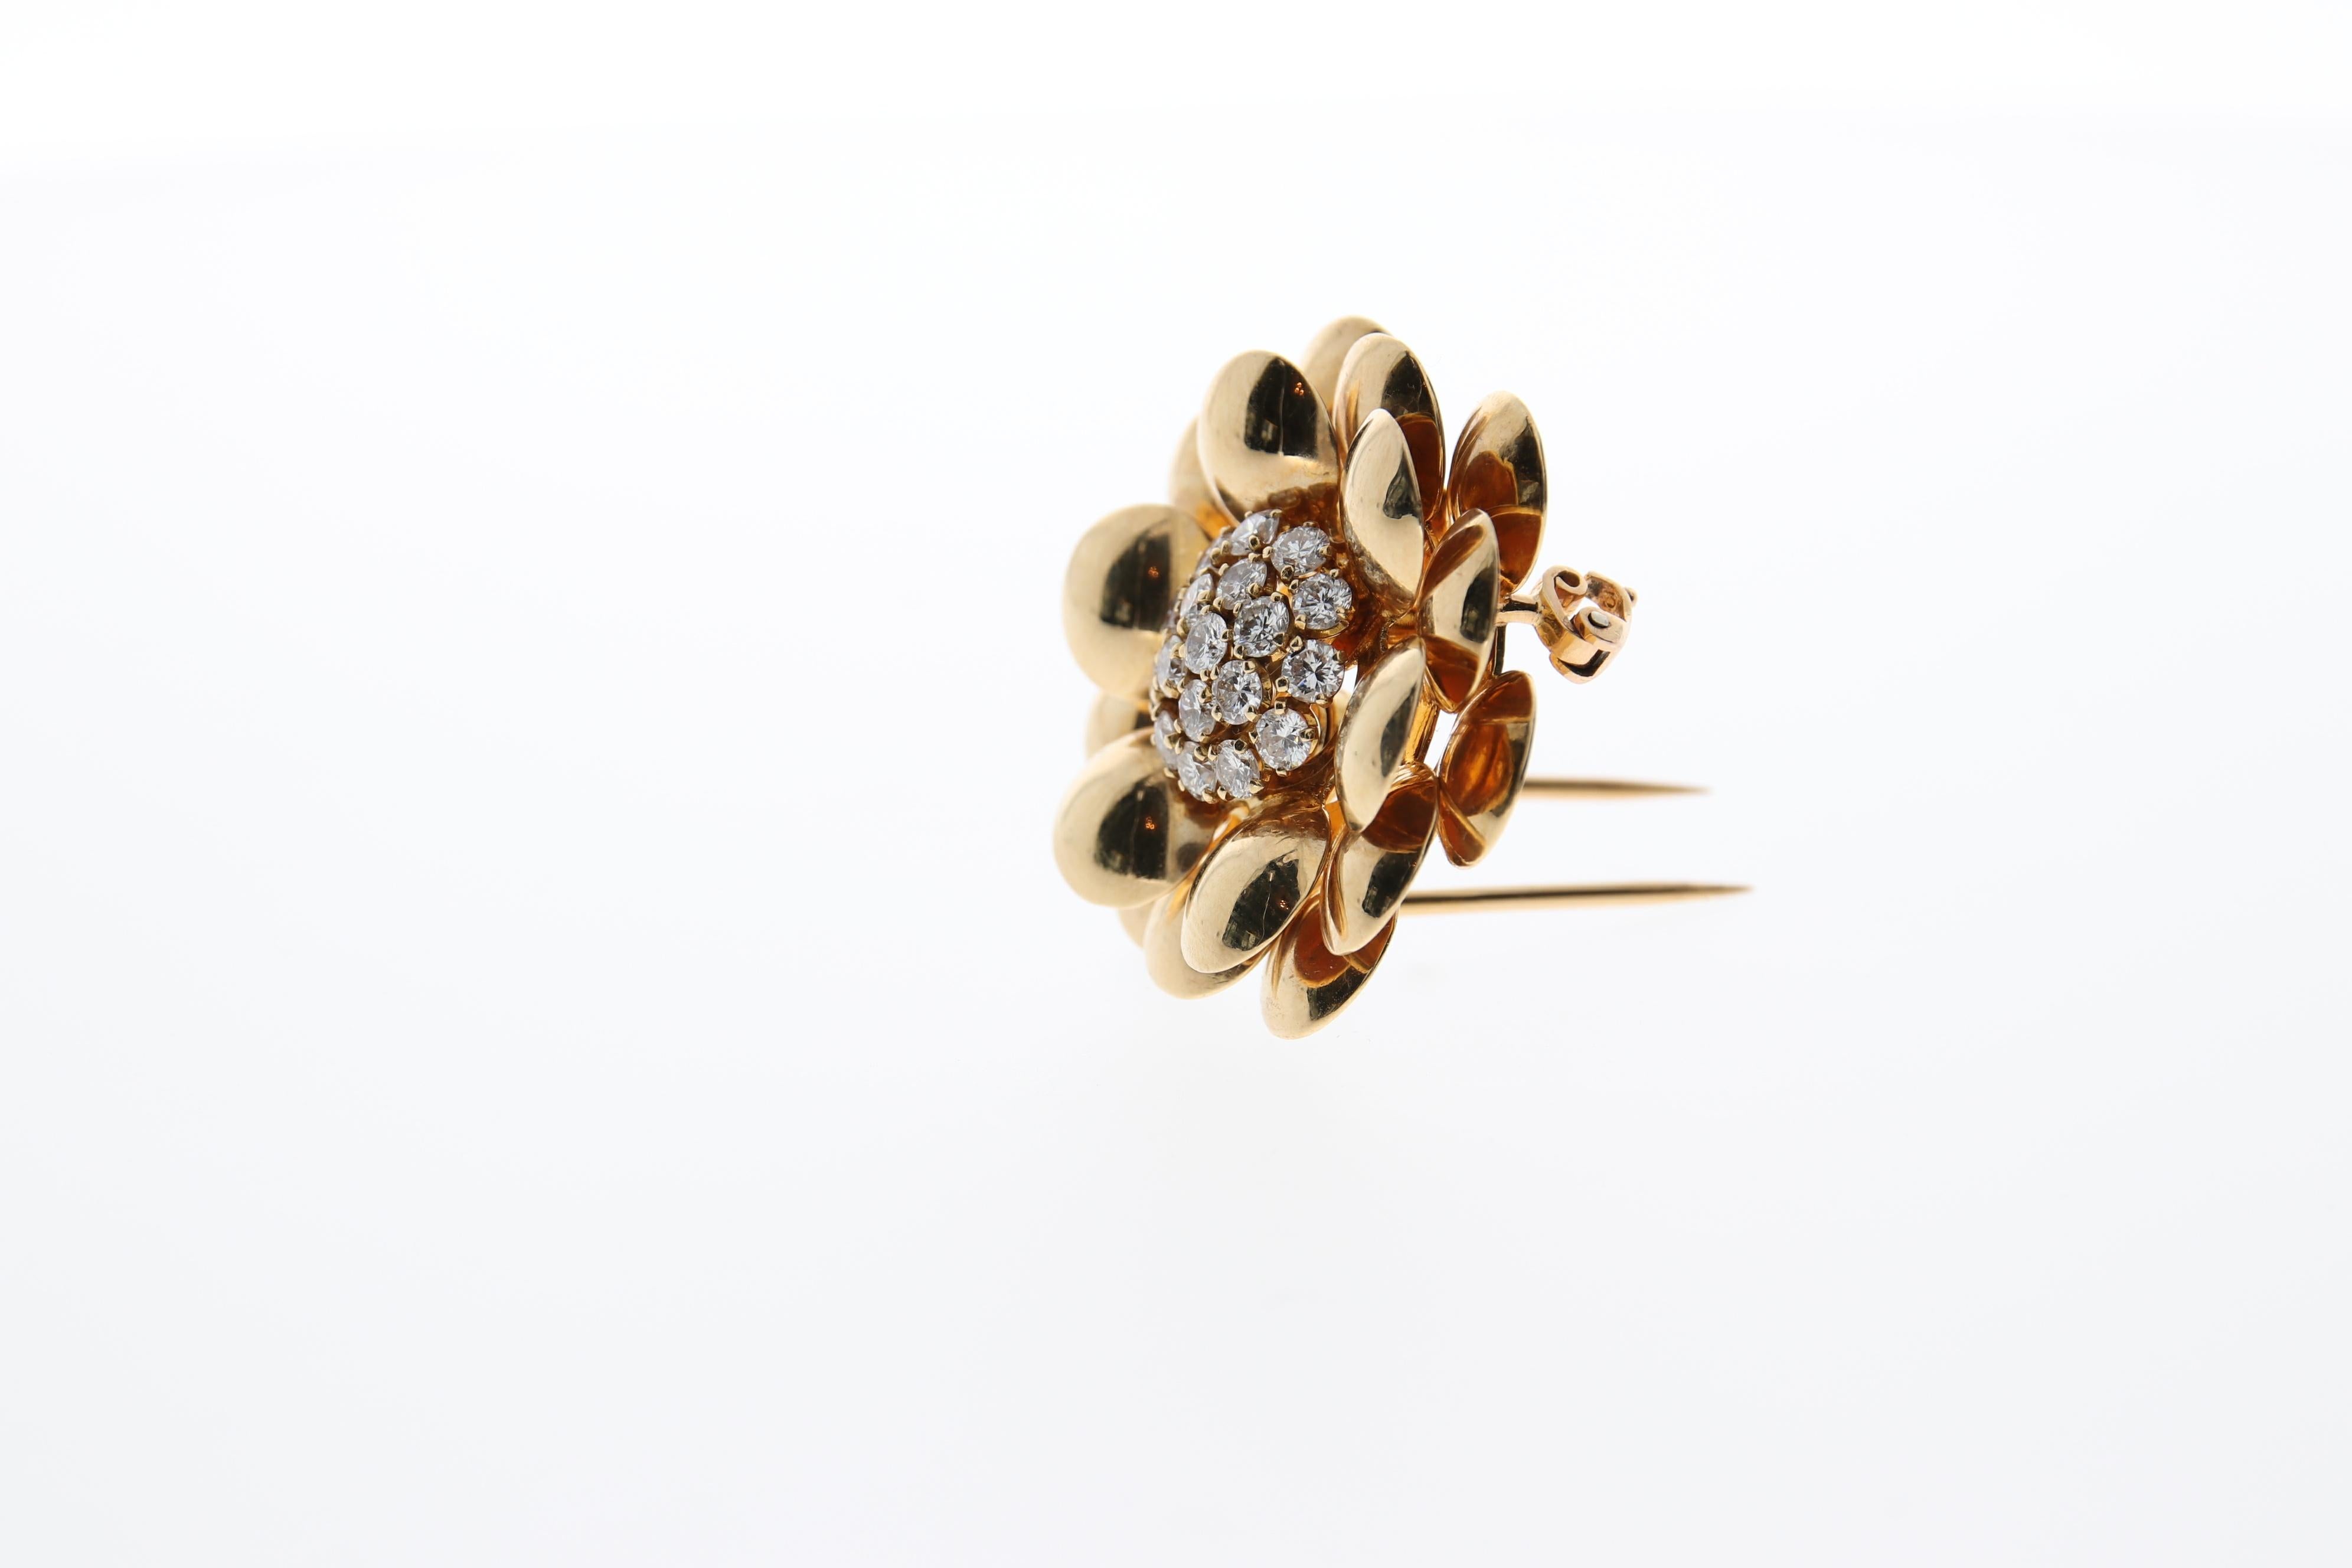 Decorative 18 KT Yellow Gold Brooch the center of the Flower is accentuated with prawn set brilliants. 20 Brilliants circa 1,70 ct. The brooch is fully signed with 